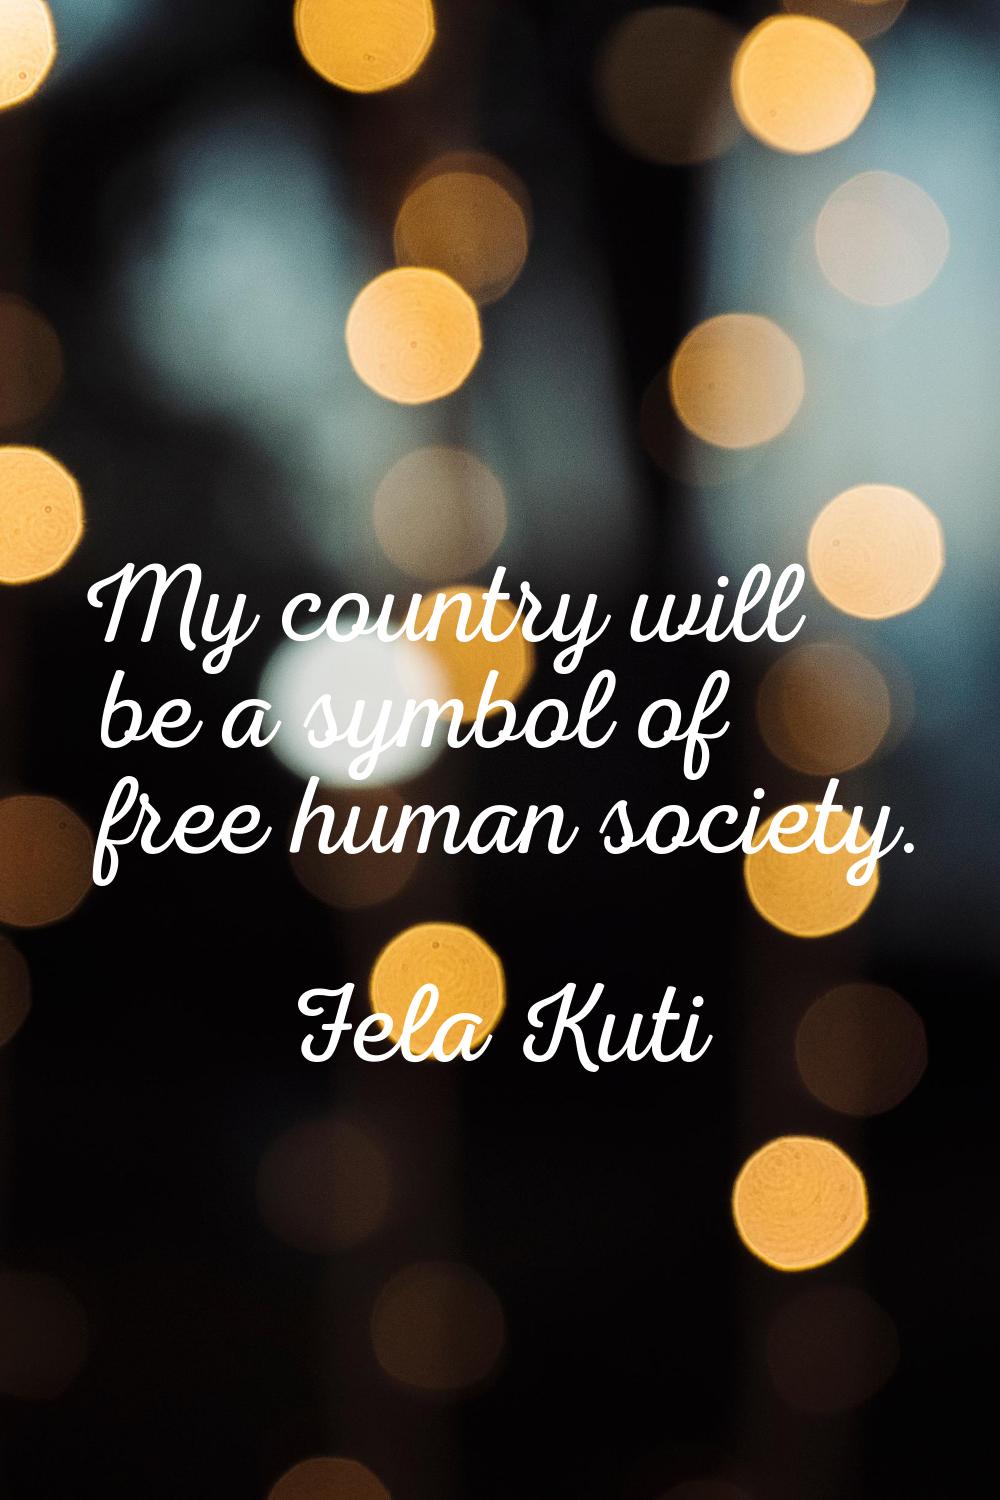 My country will be a symbol of free human society.